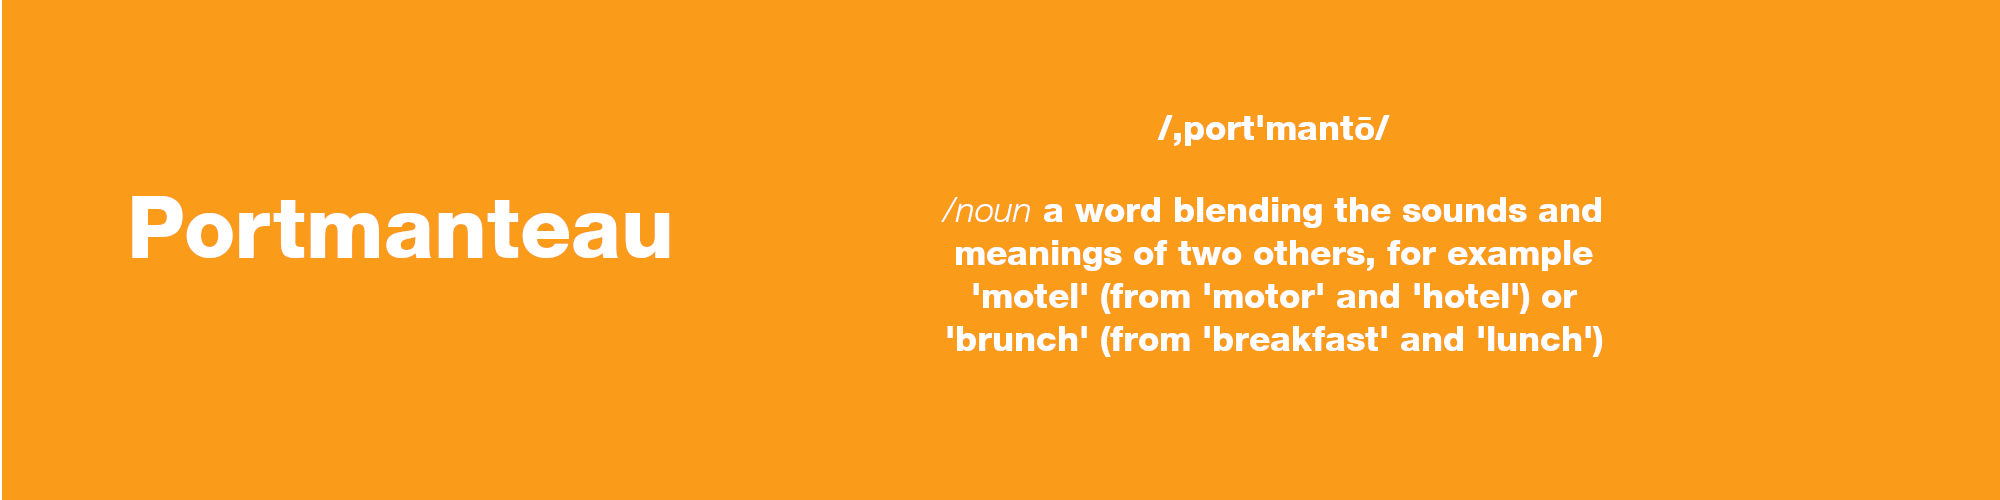 Portmanteau Noun a word blending the sounds and meanings of two others, for example 'motel' (from 'motor' and 'hotel') or 'brunch' (from 'breakfast' and 'lunch'))